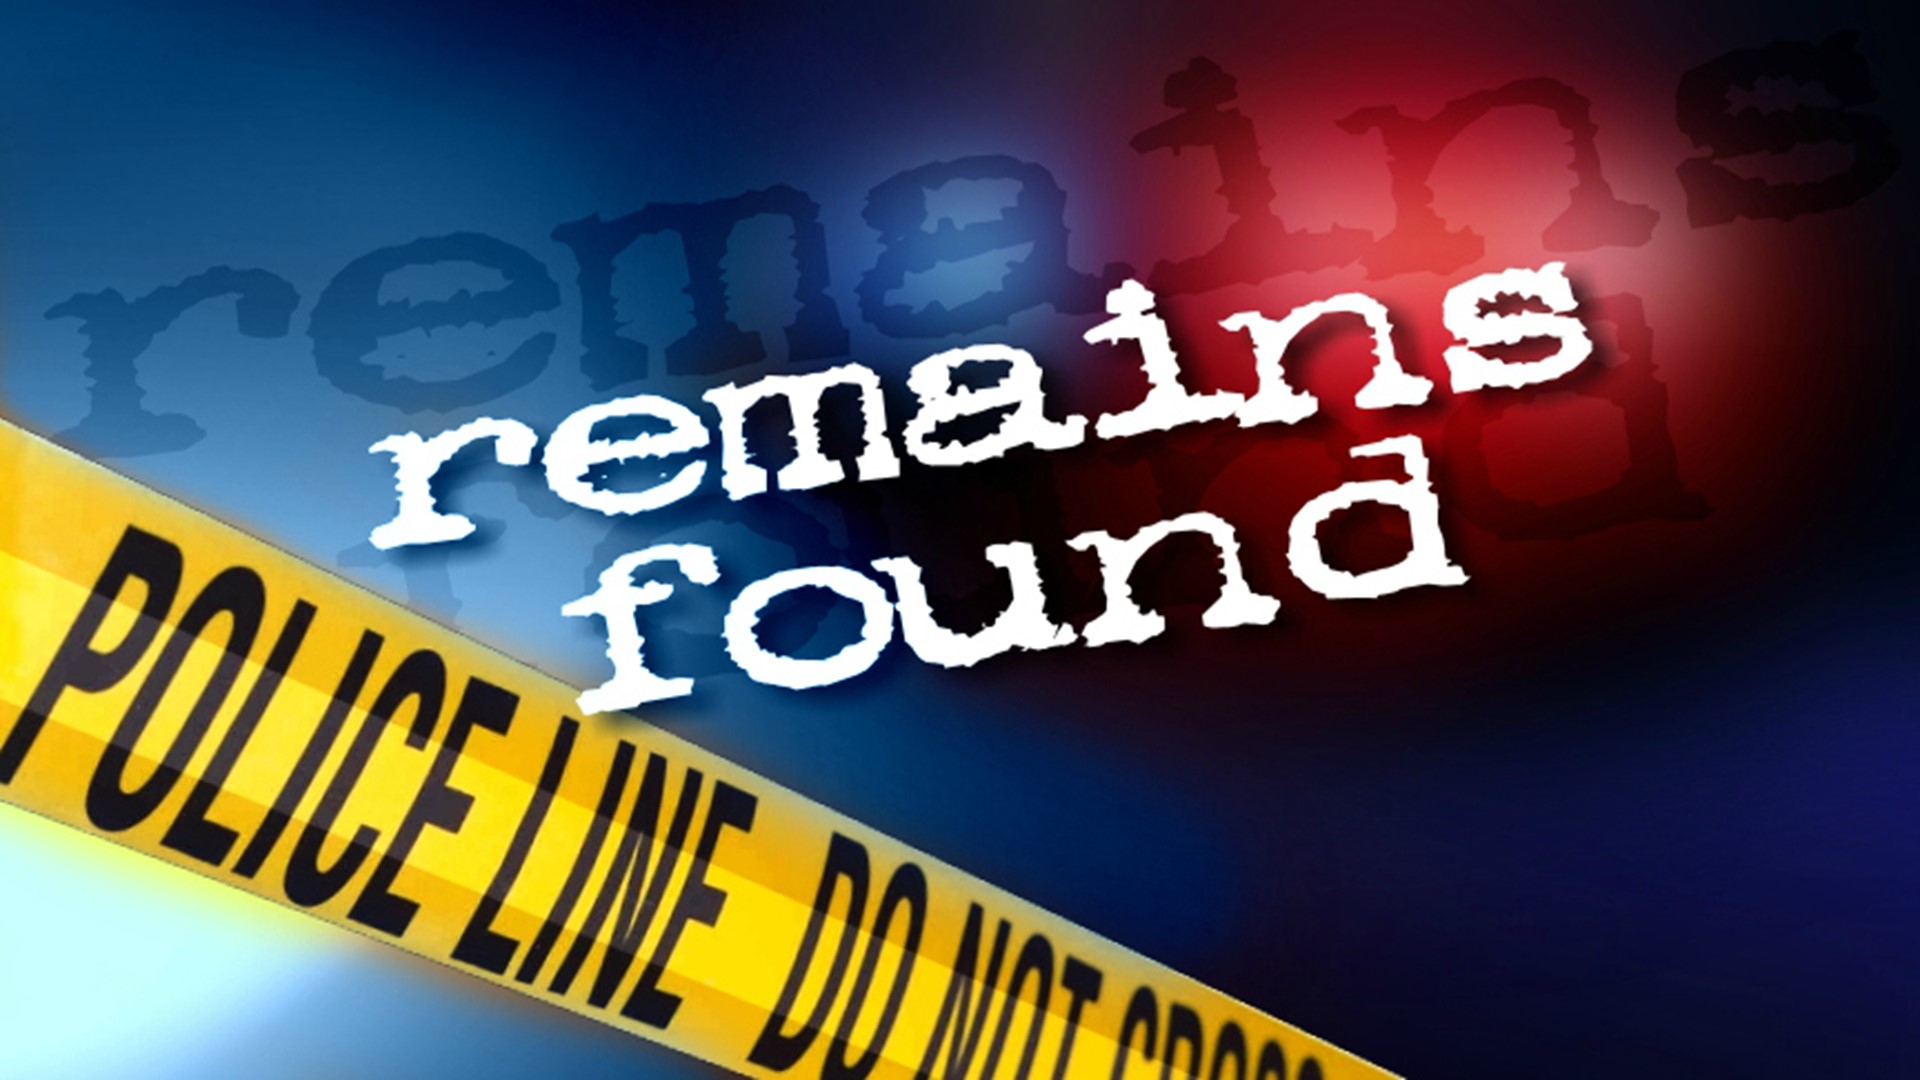 Remains were found on Wednesday and Thursday.